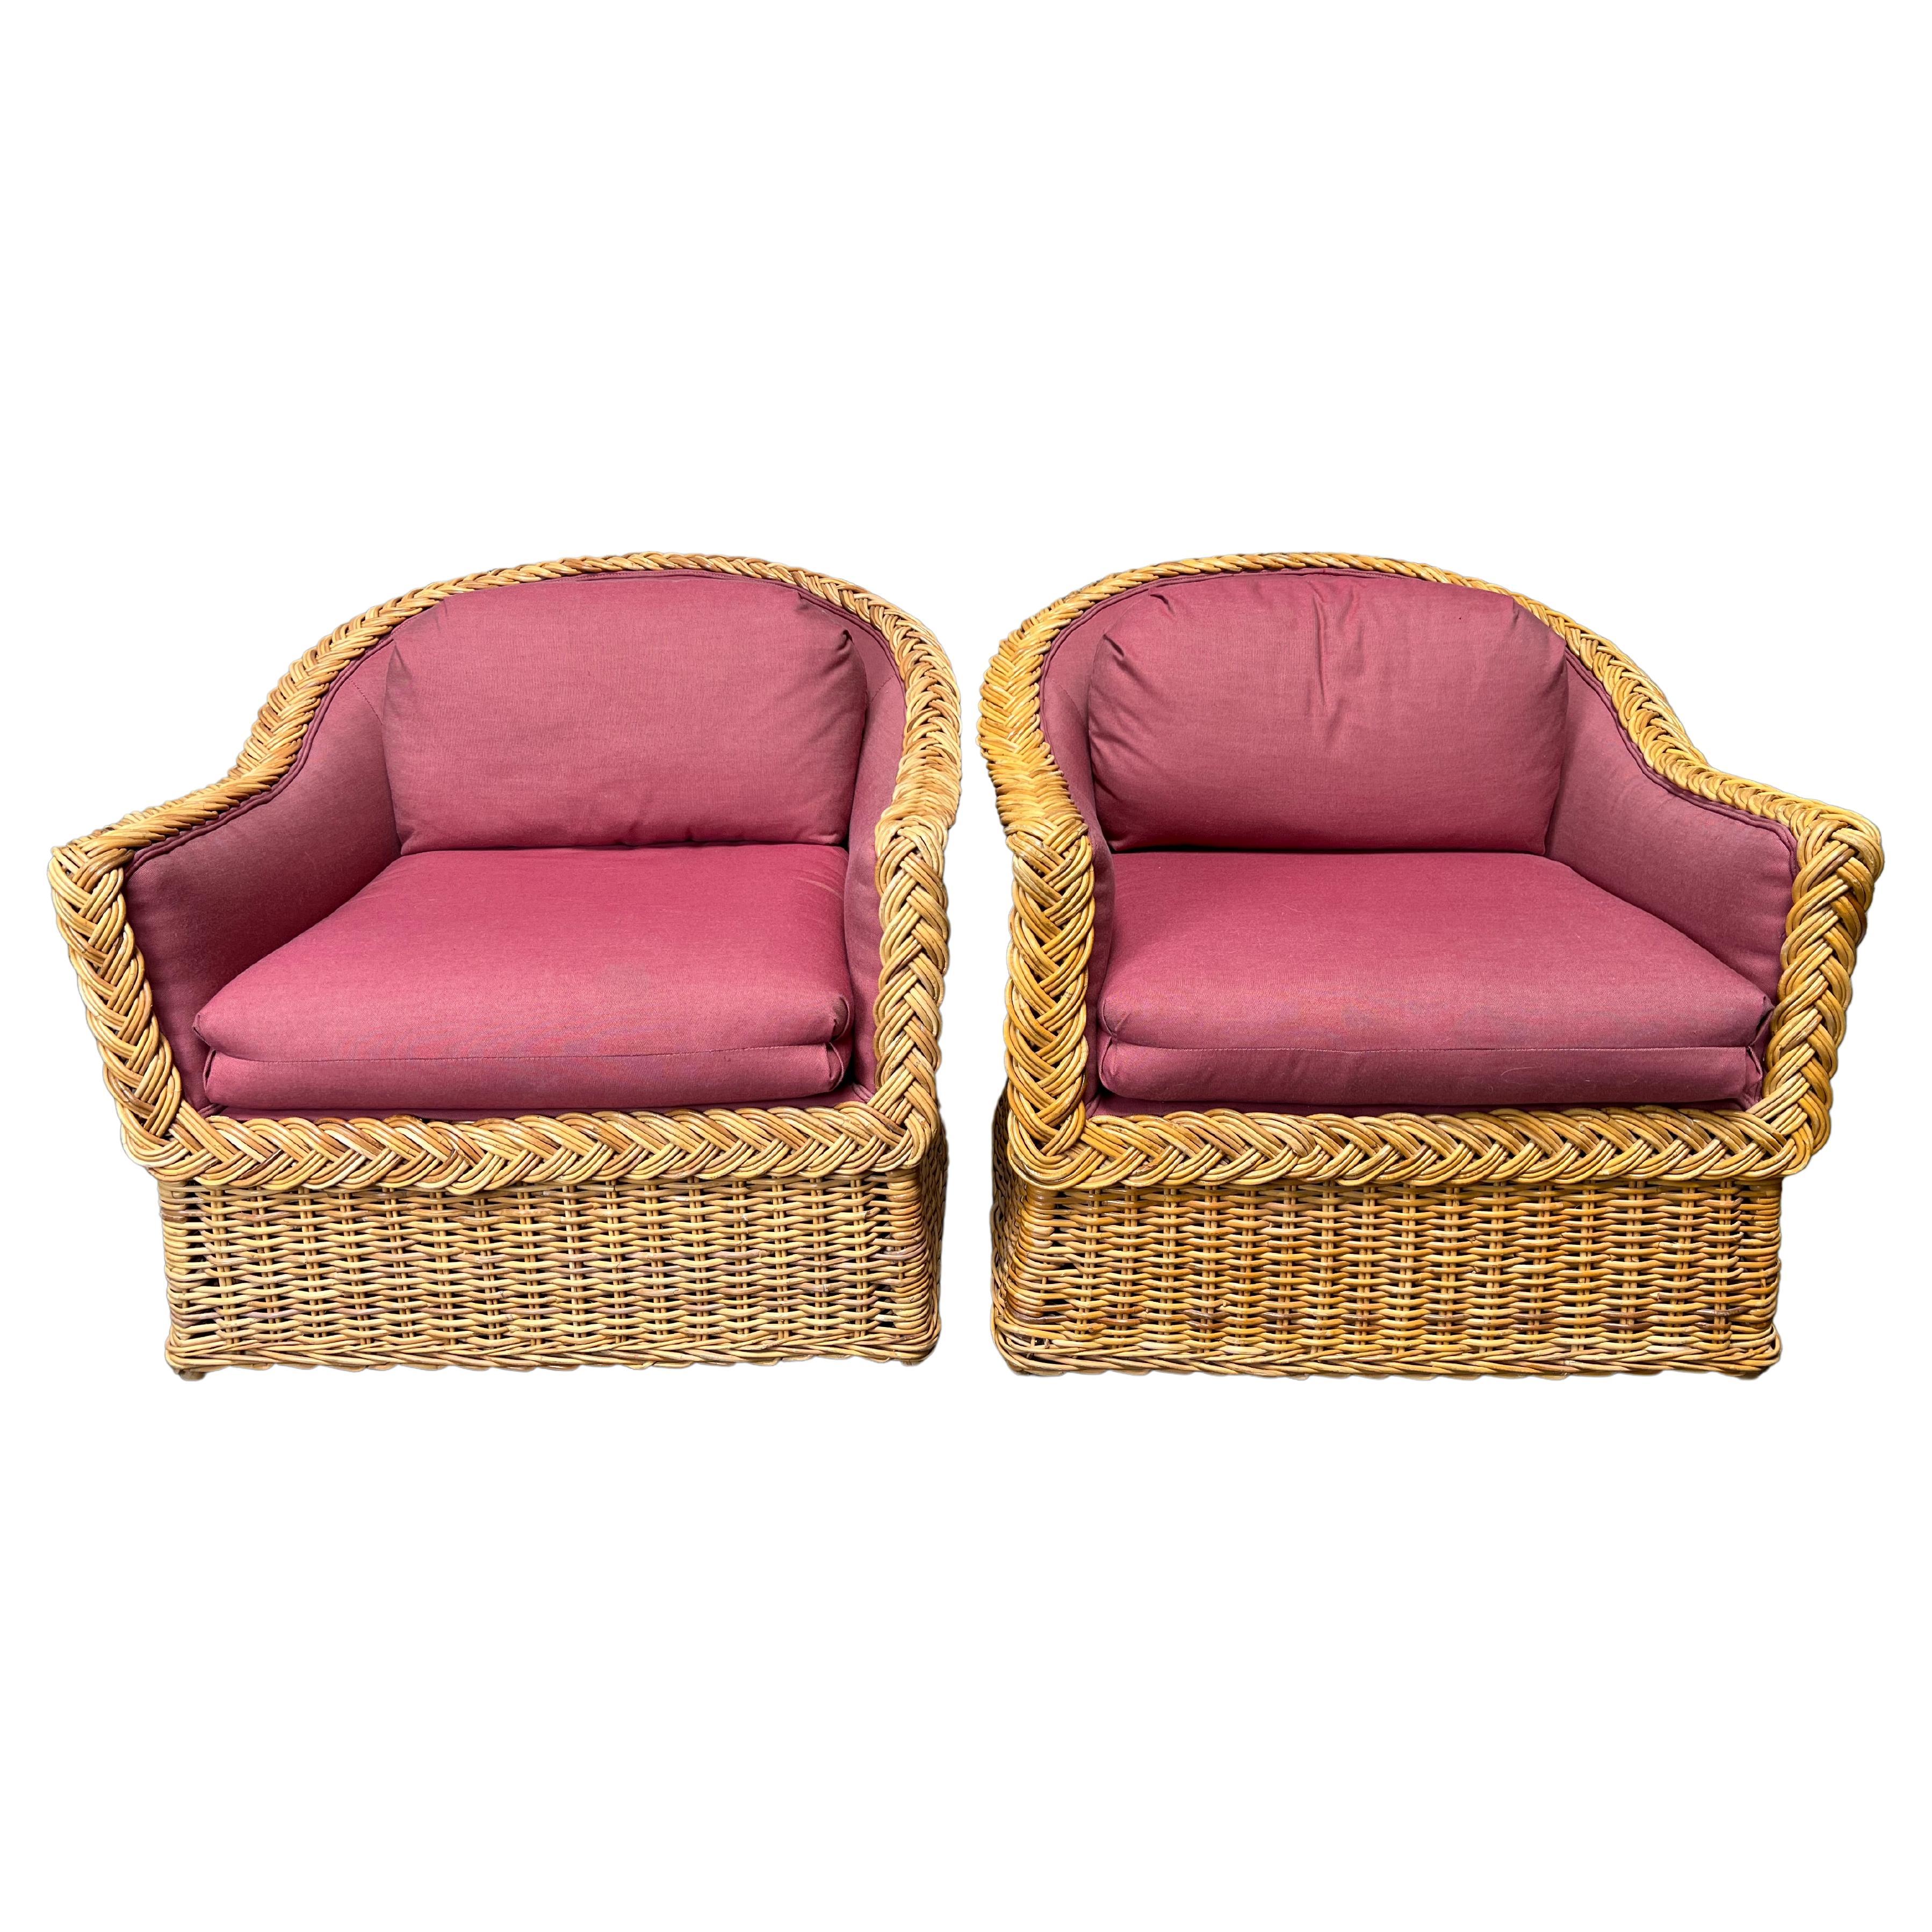 Pair of Large Wicker Works Club Chairs